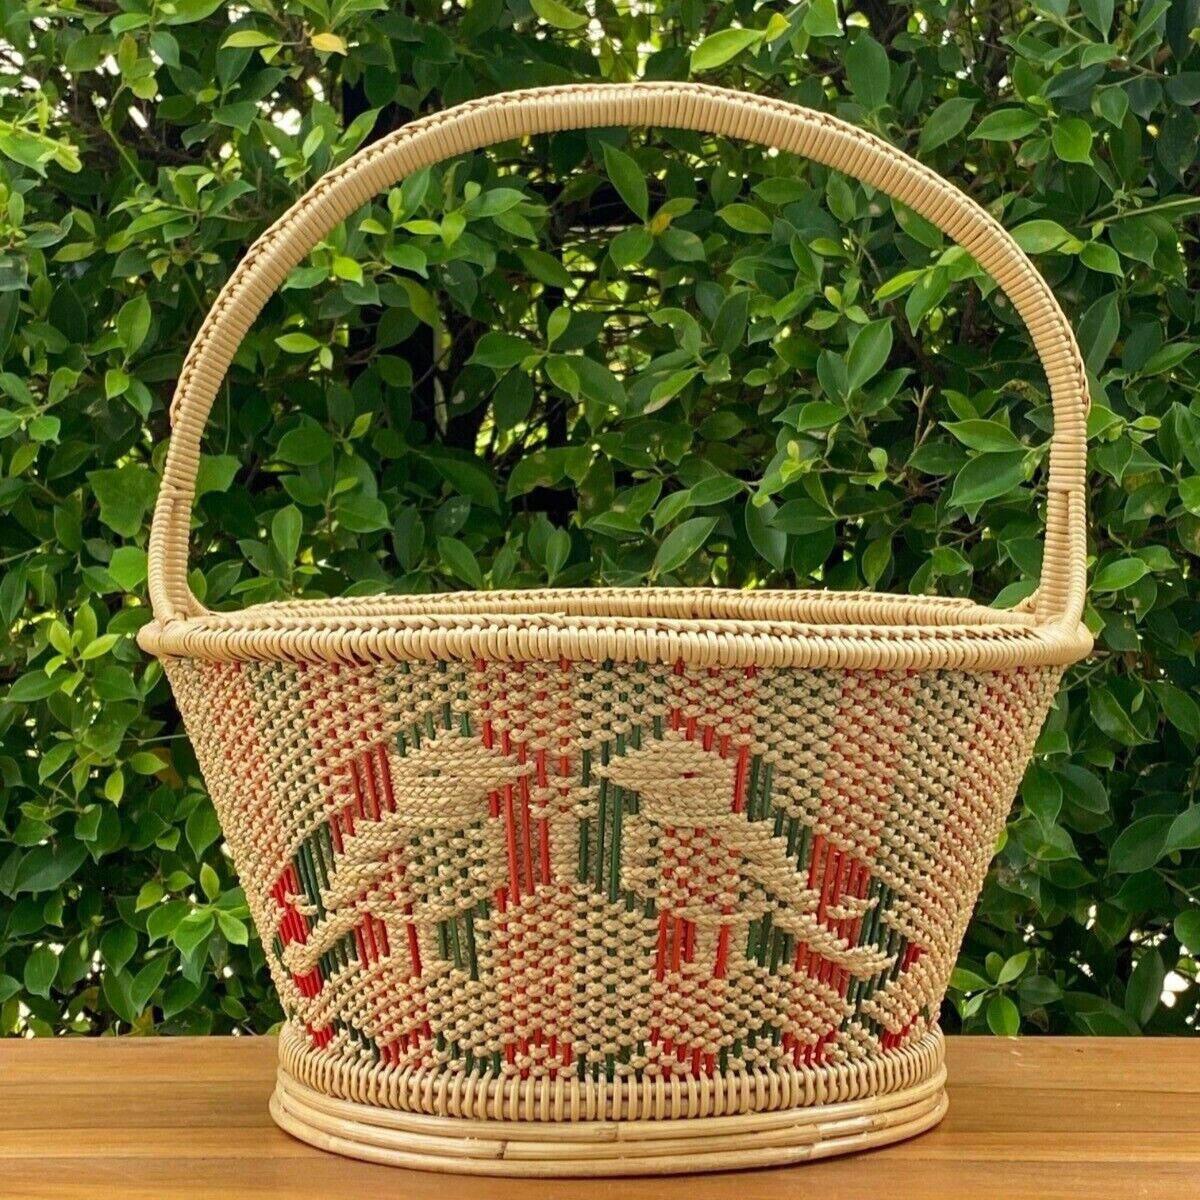 Thai Jungle Birds Basket: Hand-Woven Bamboo and Rattan Traditional Thai Patterns